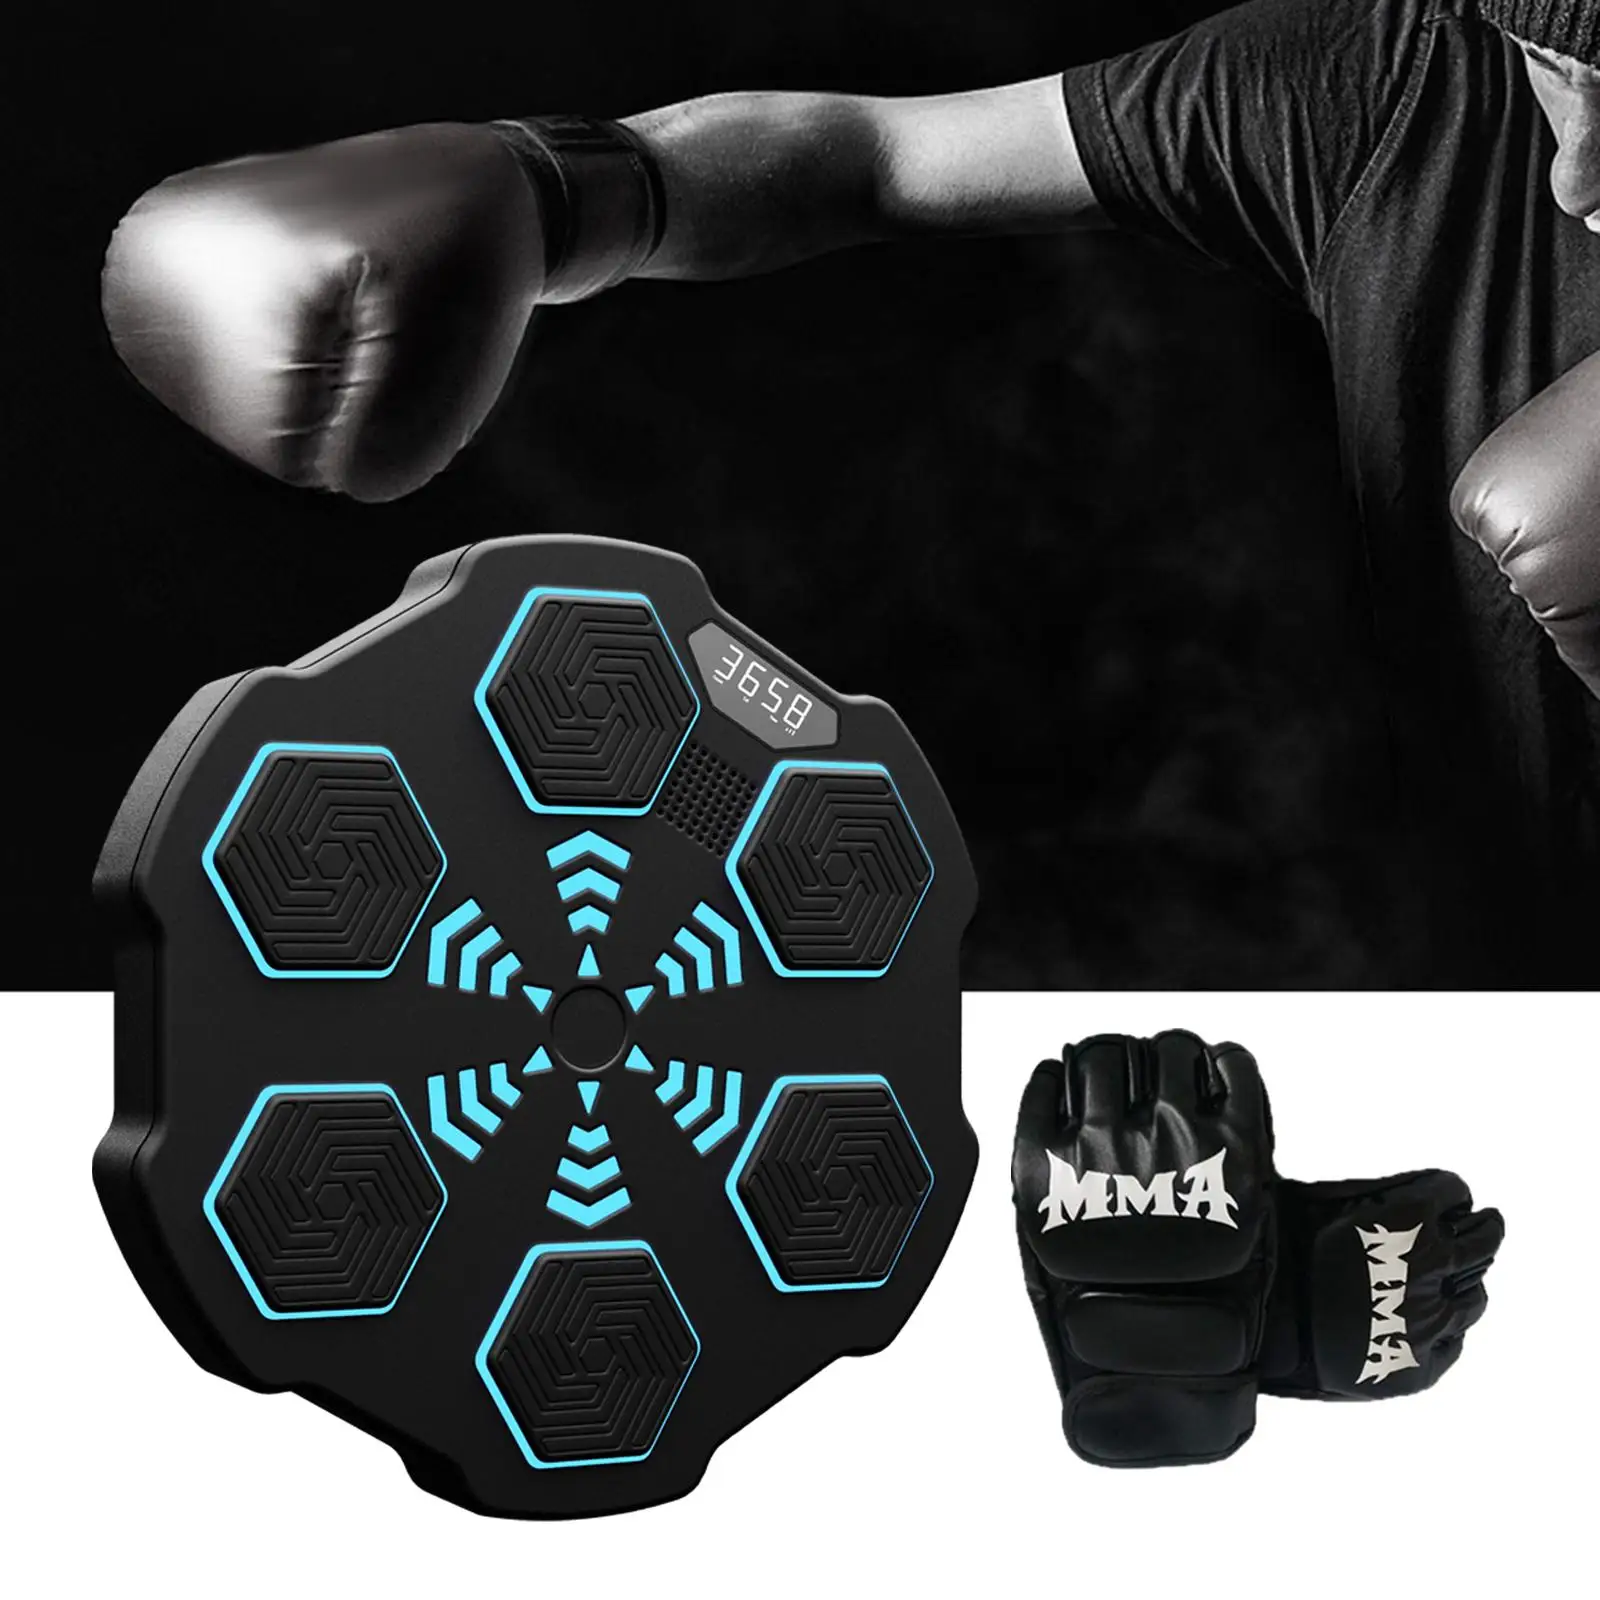 Music Boxing Machine Smart Electronic Wall Target for Game Strength